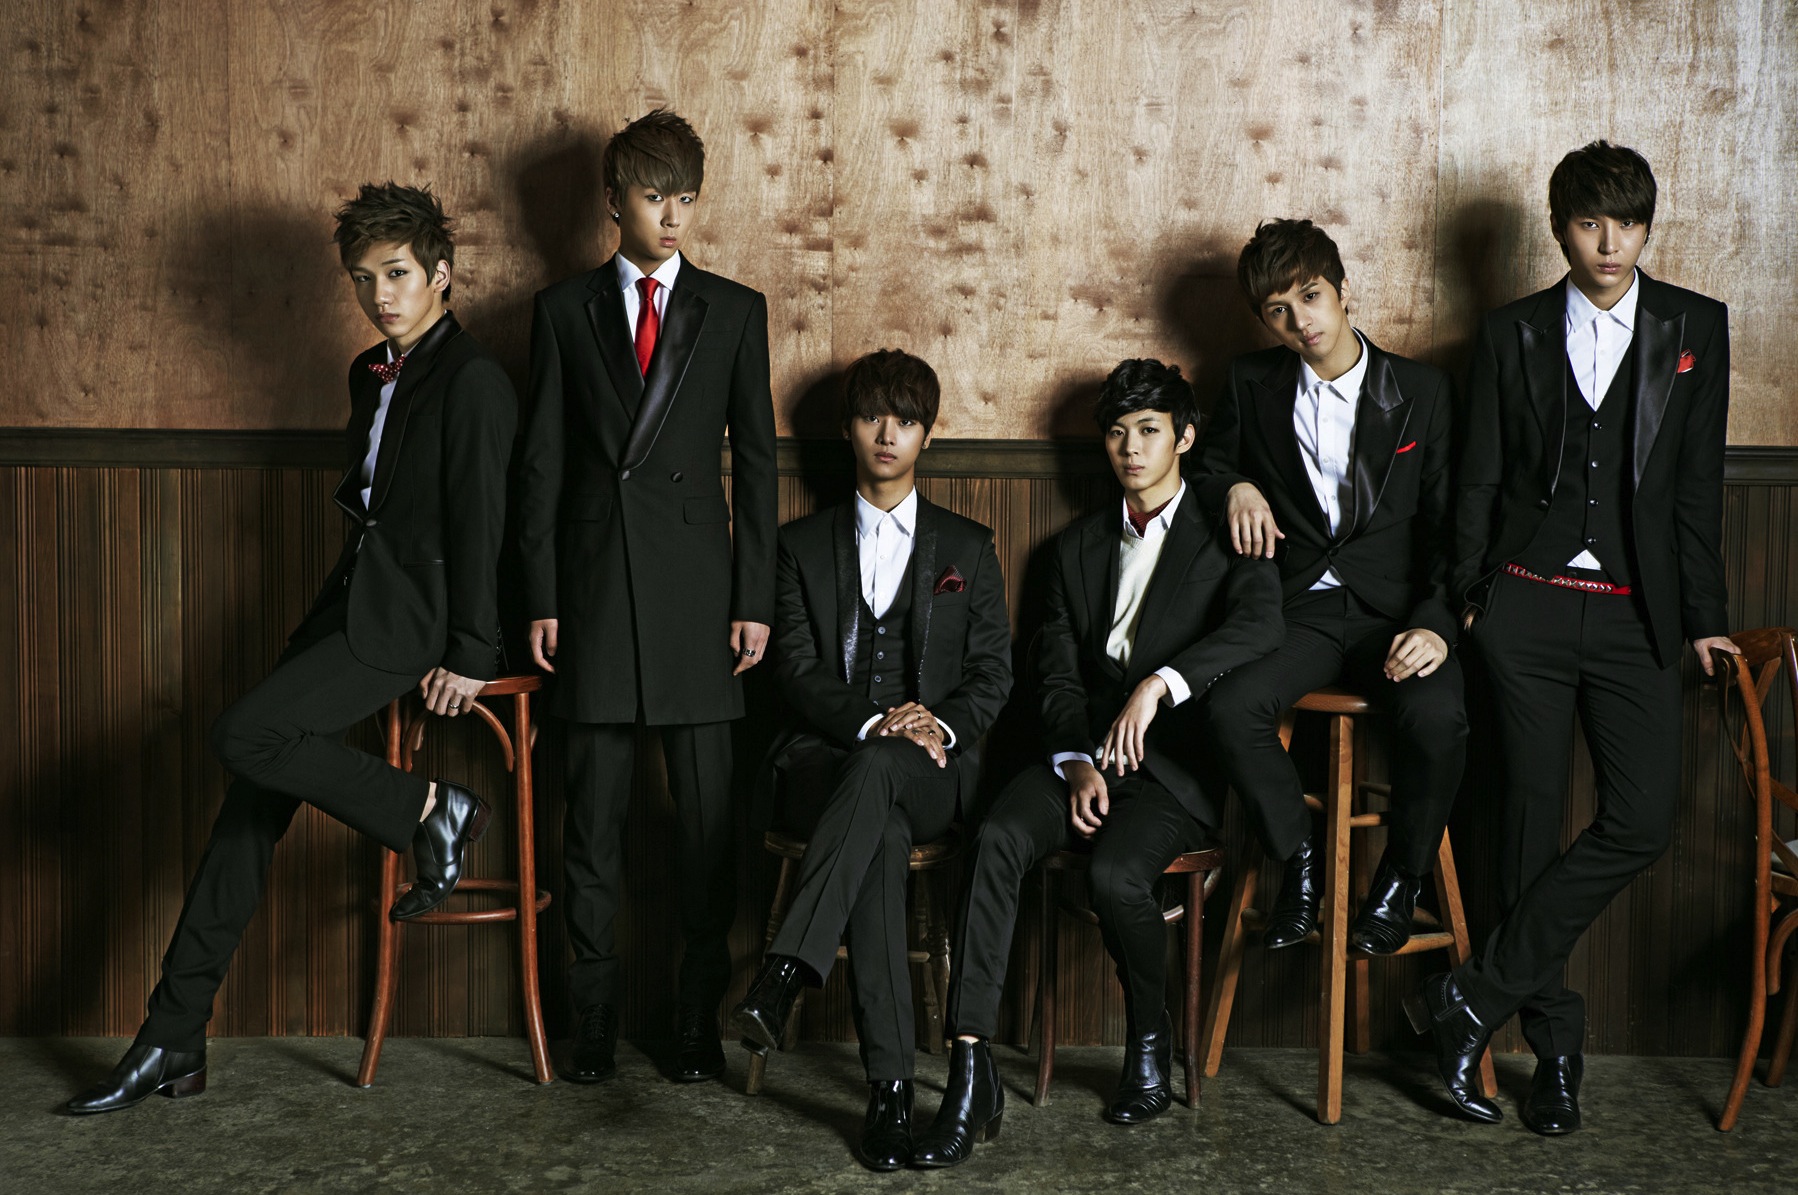 Download Vixx Image - Member Of The Heirs , HD Wallpaper & Backgrounds